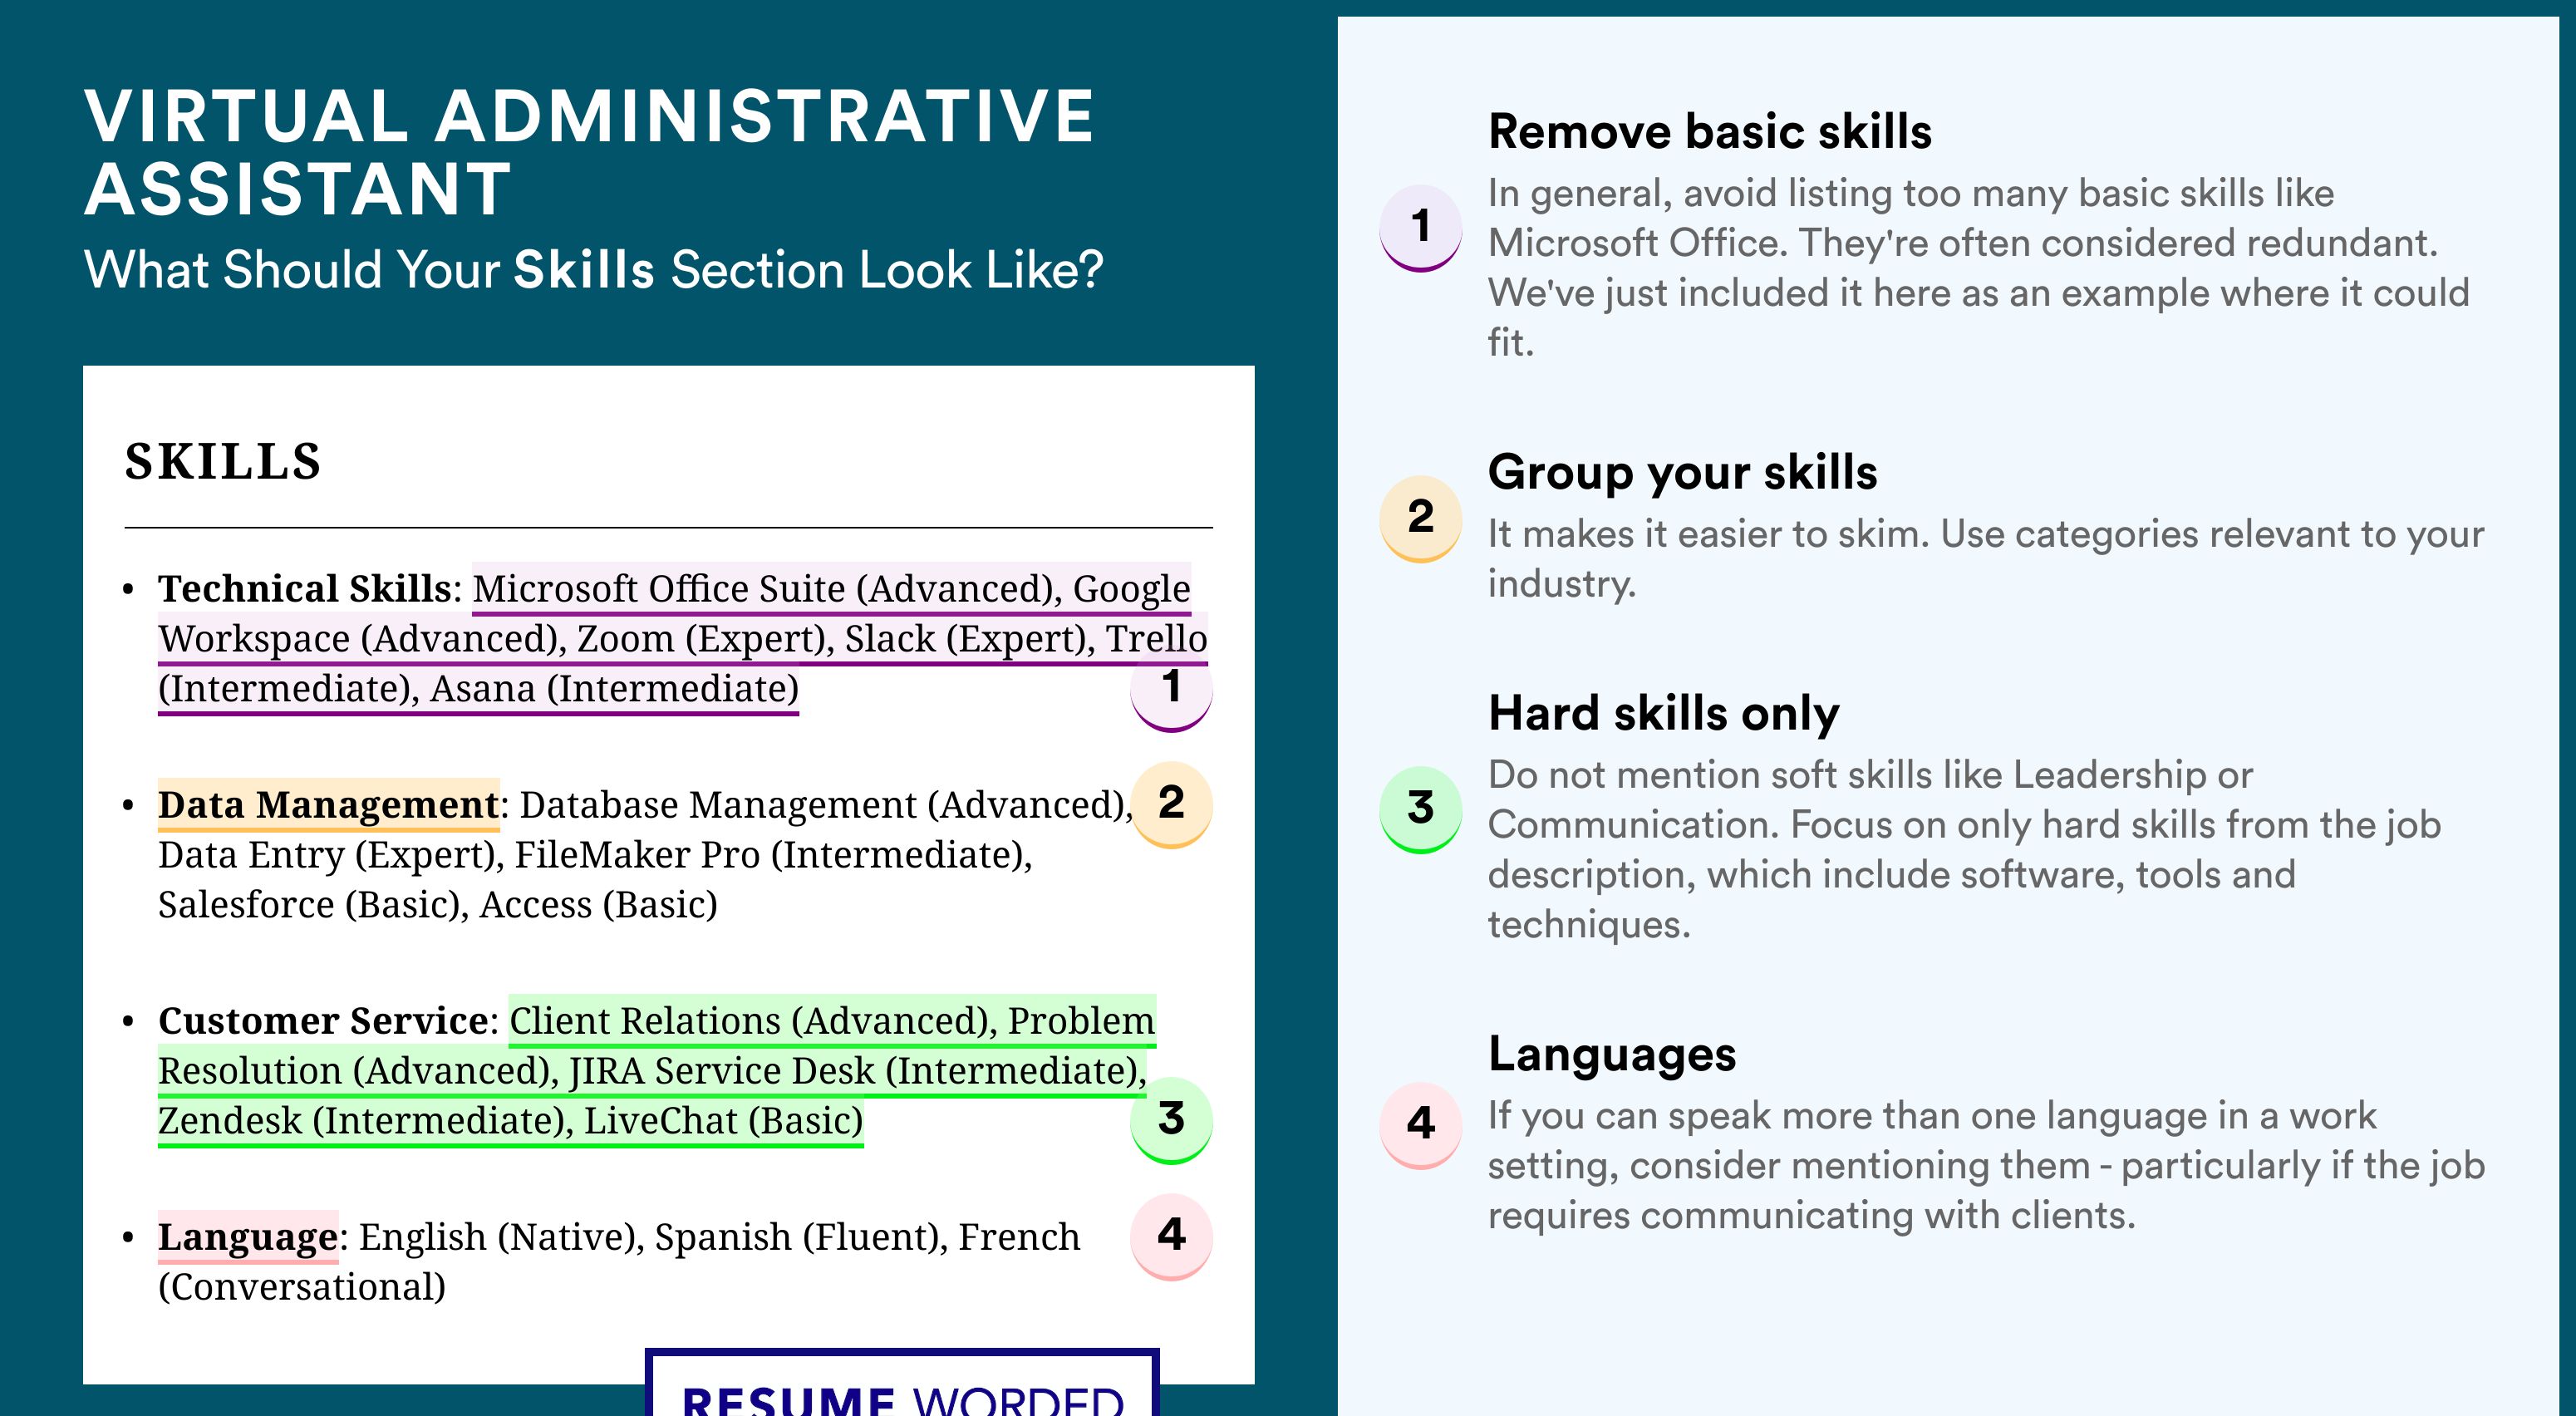 How To Write Your Skills Section - Virtual Administrative Assistant Roles